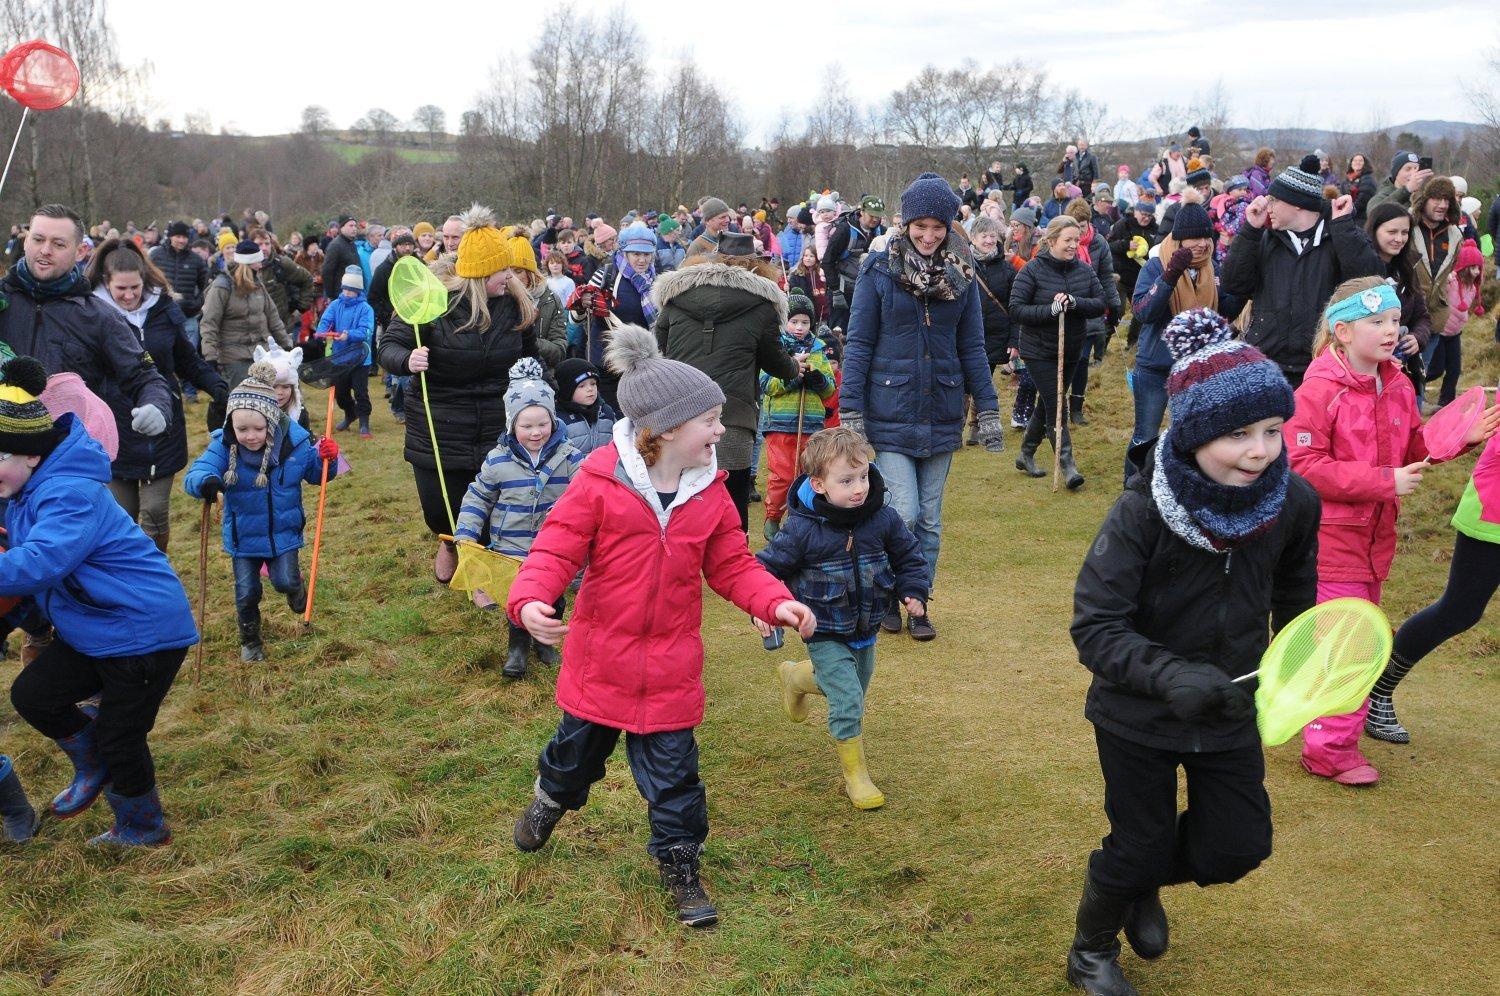 The Great Selkirk Haggis Hunt gets under way on Sunday morning when 567 people climbed Selkirk hill